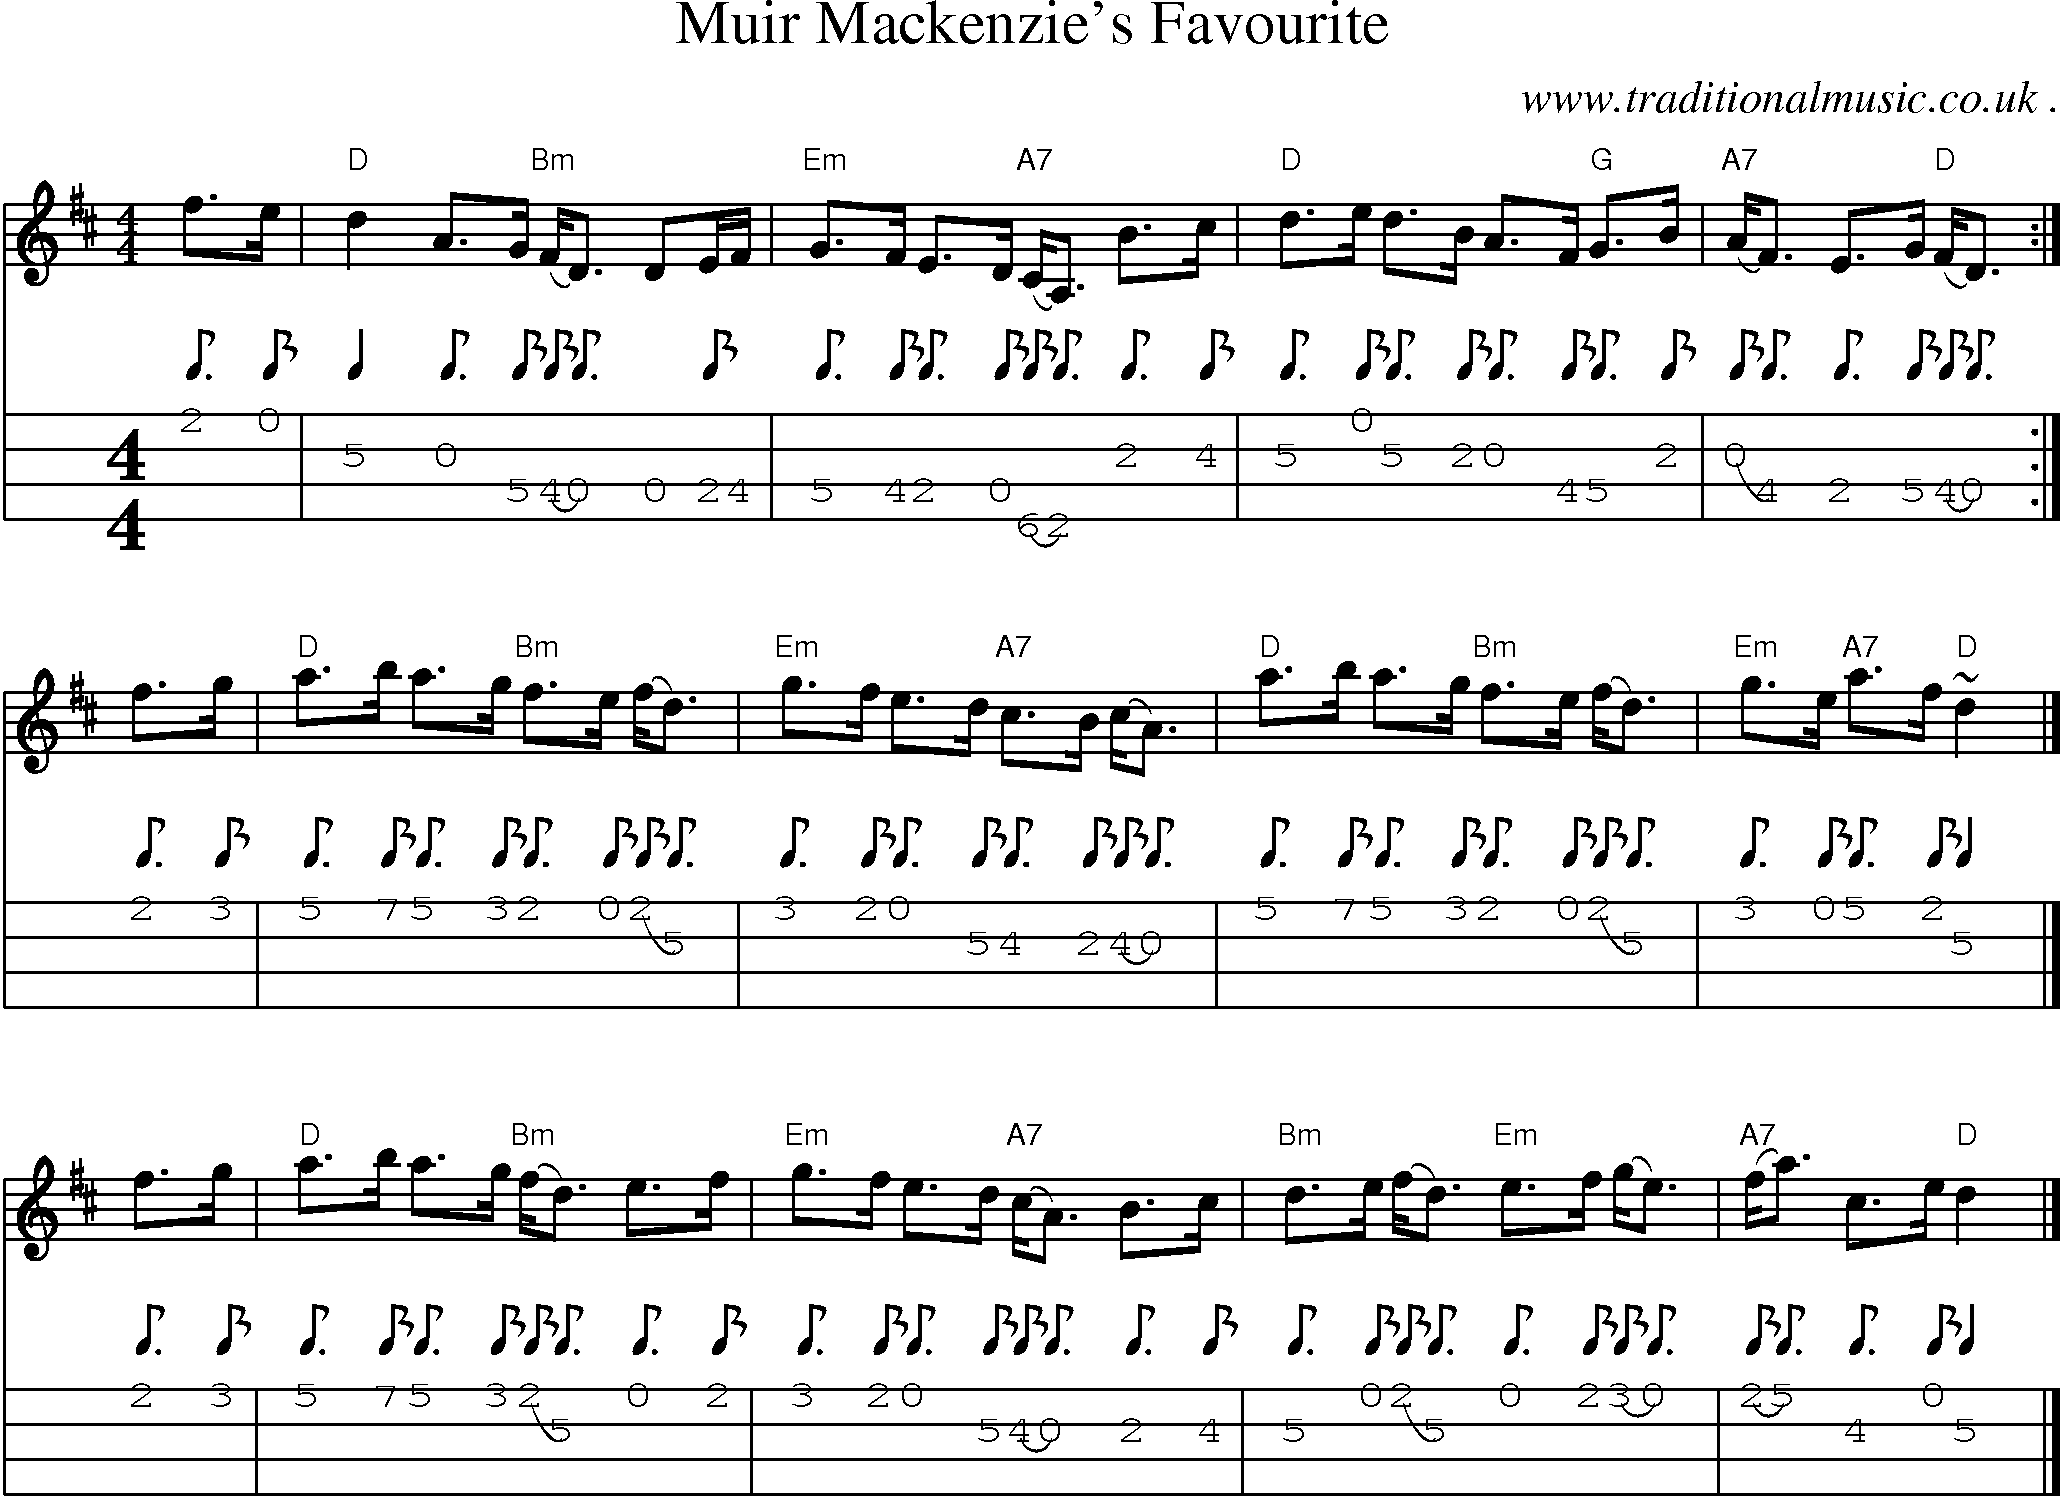 Sheet-music  score, Chords and Mandolin Tabs for Muir Mackenzies Favourite